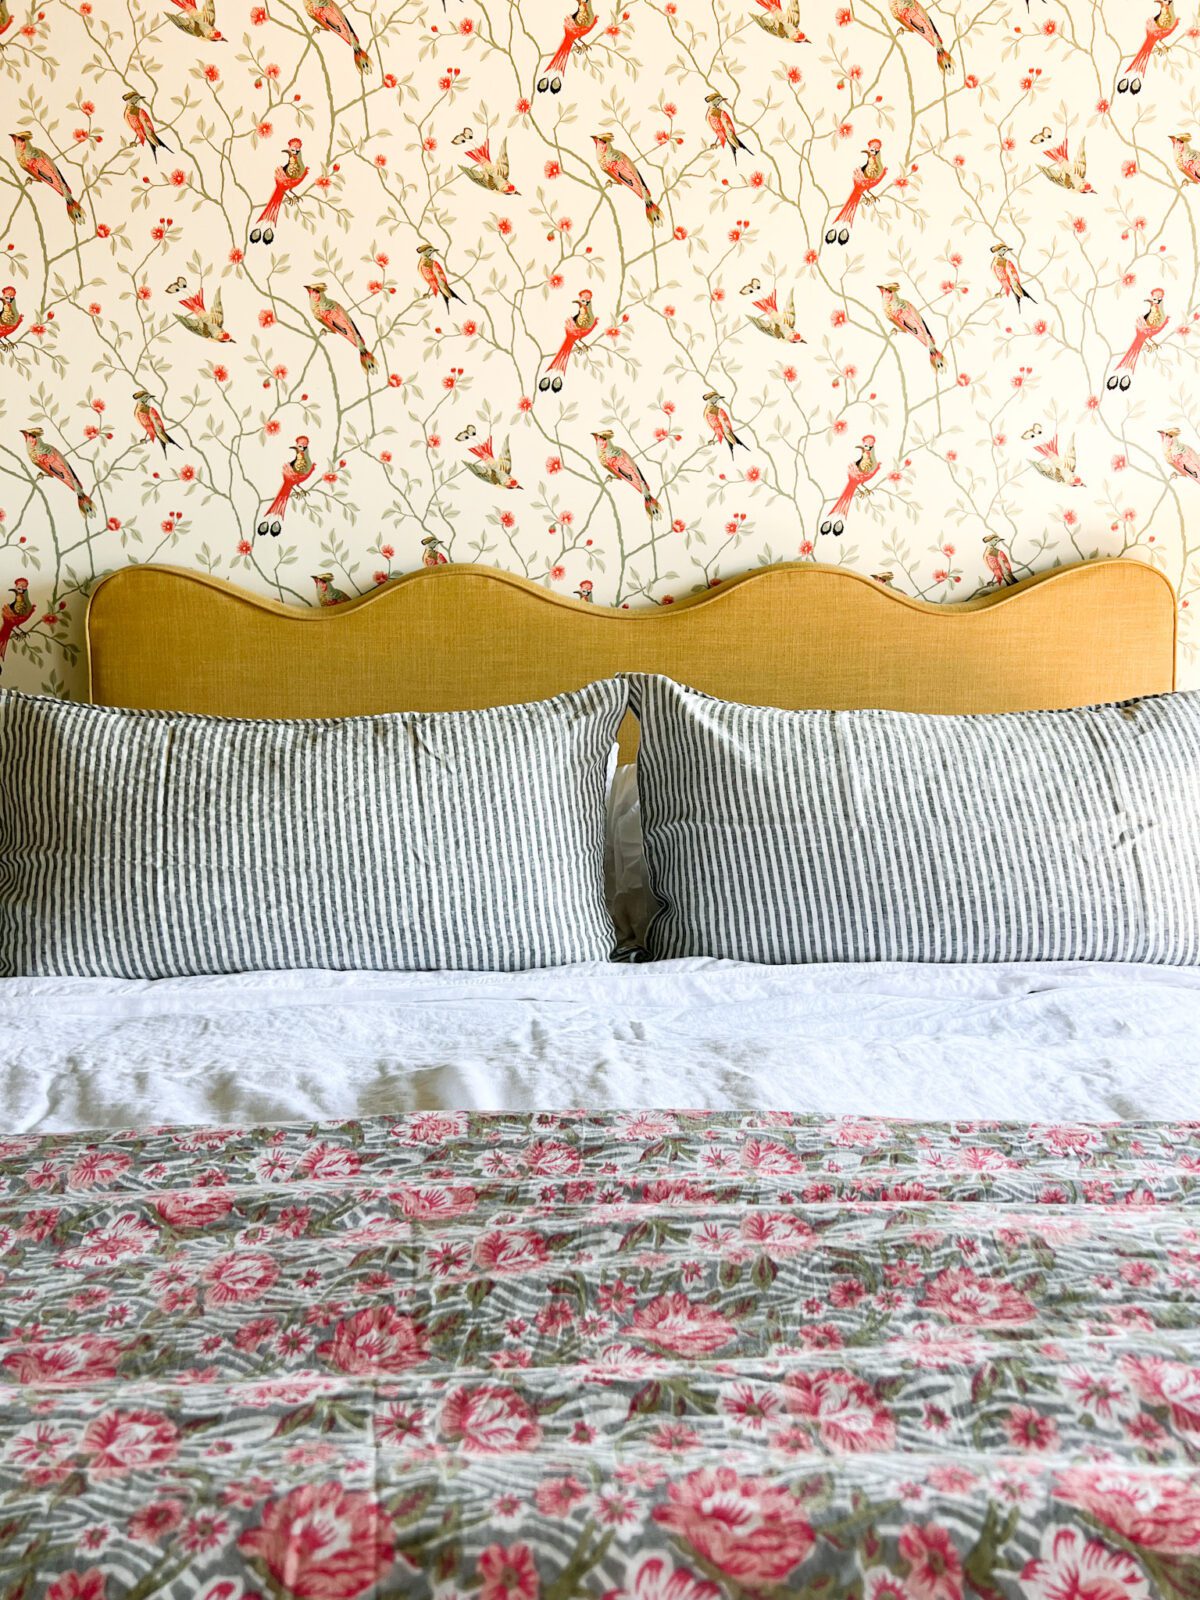 Tight view of a striped-patterned pillowcase, floral quilt and bird-patterned wallpaper.